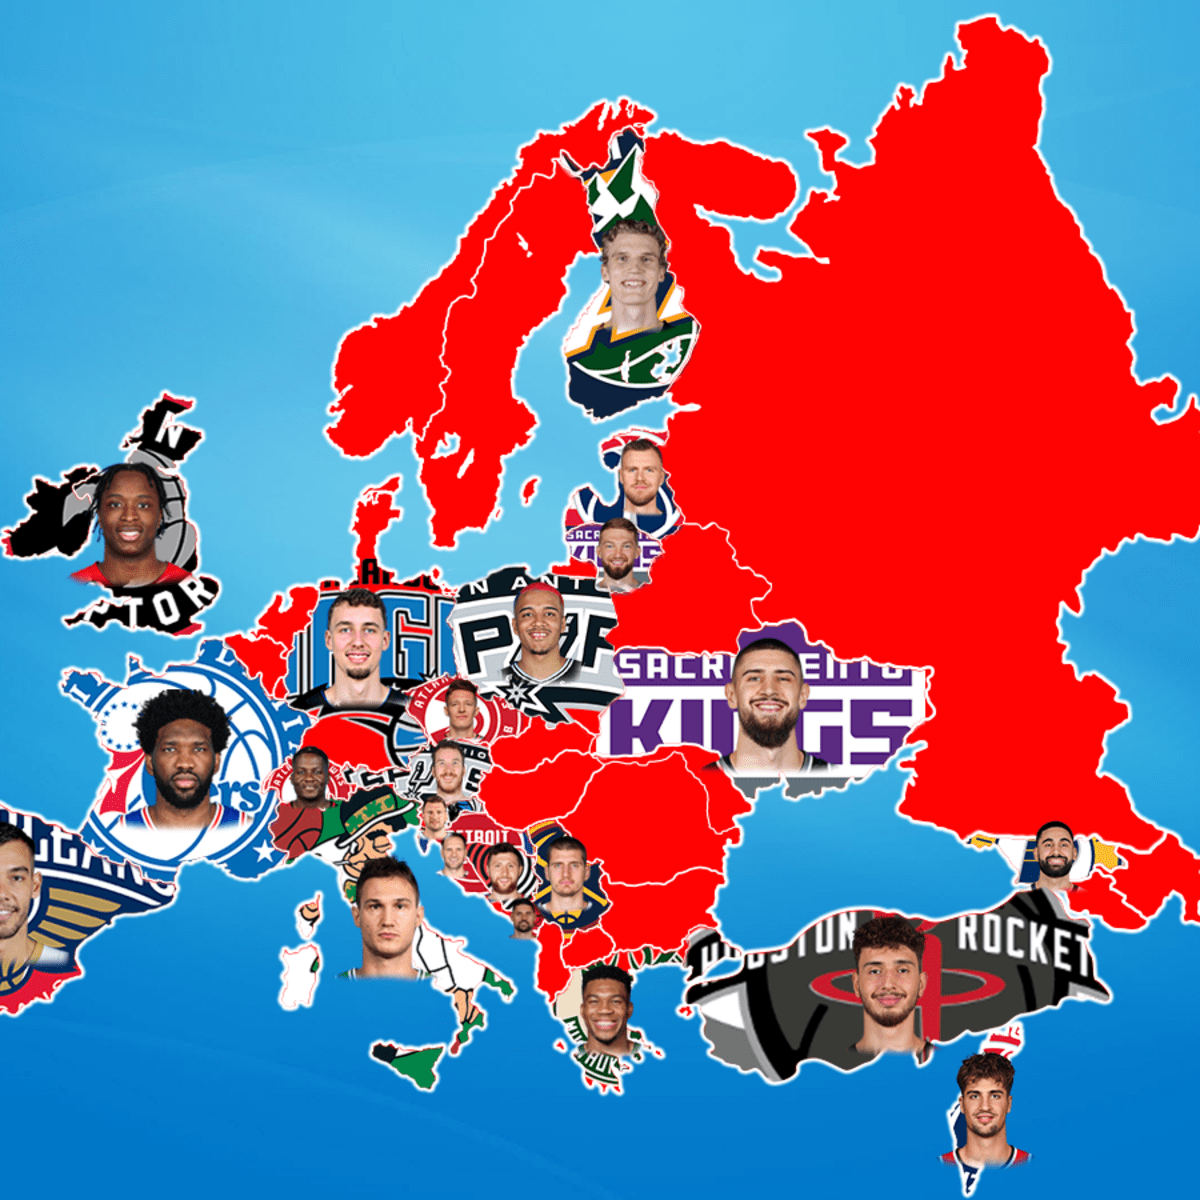 Guess The Football Team By Players' Nationality - Season 22/23